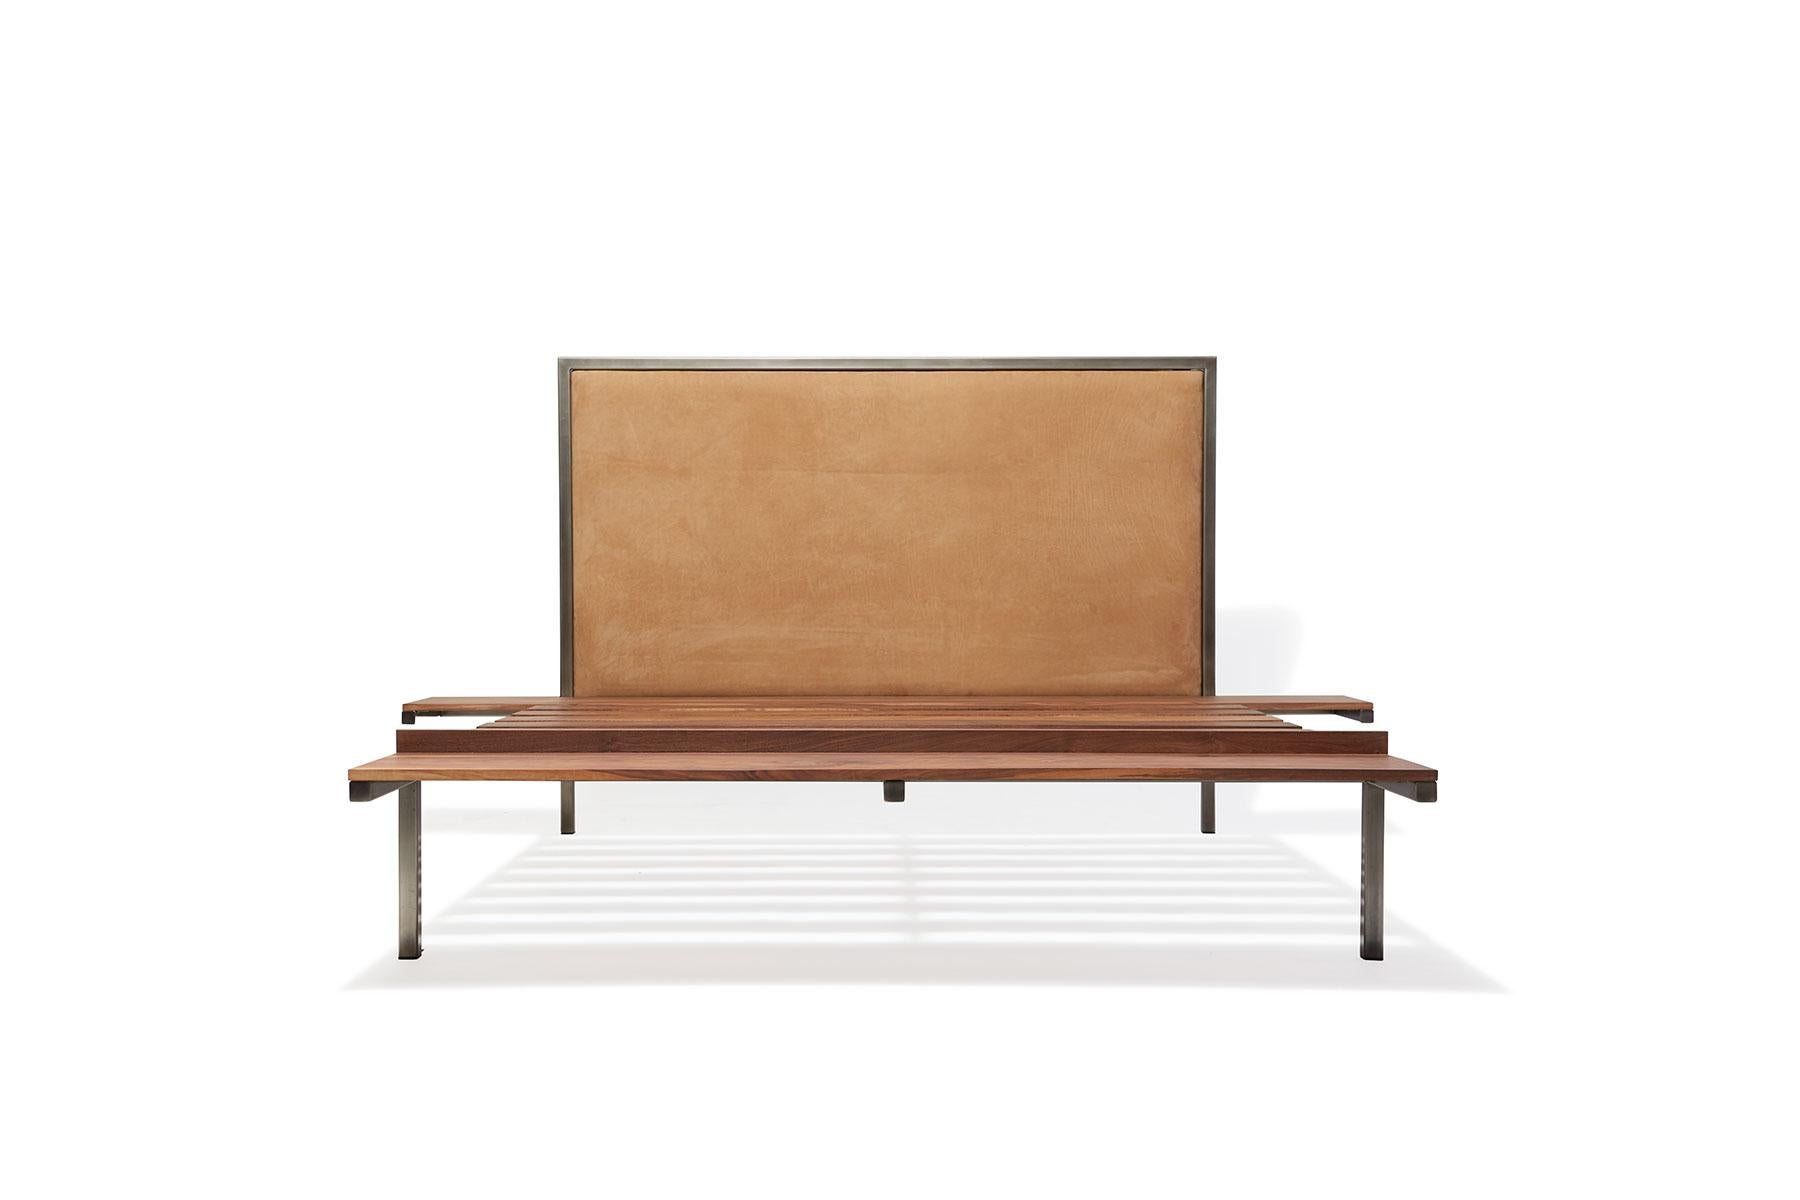 Rest with style in the Stephen Kenn Inheritance Bed. Streamlined and simple, the bed is designed serves three furnishing purposes with integrated side tables and a foot bench.

Beginning with an antique nickel tubular steel frame, walnut wood slats